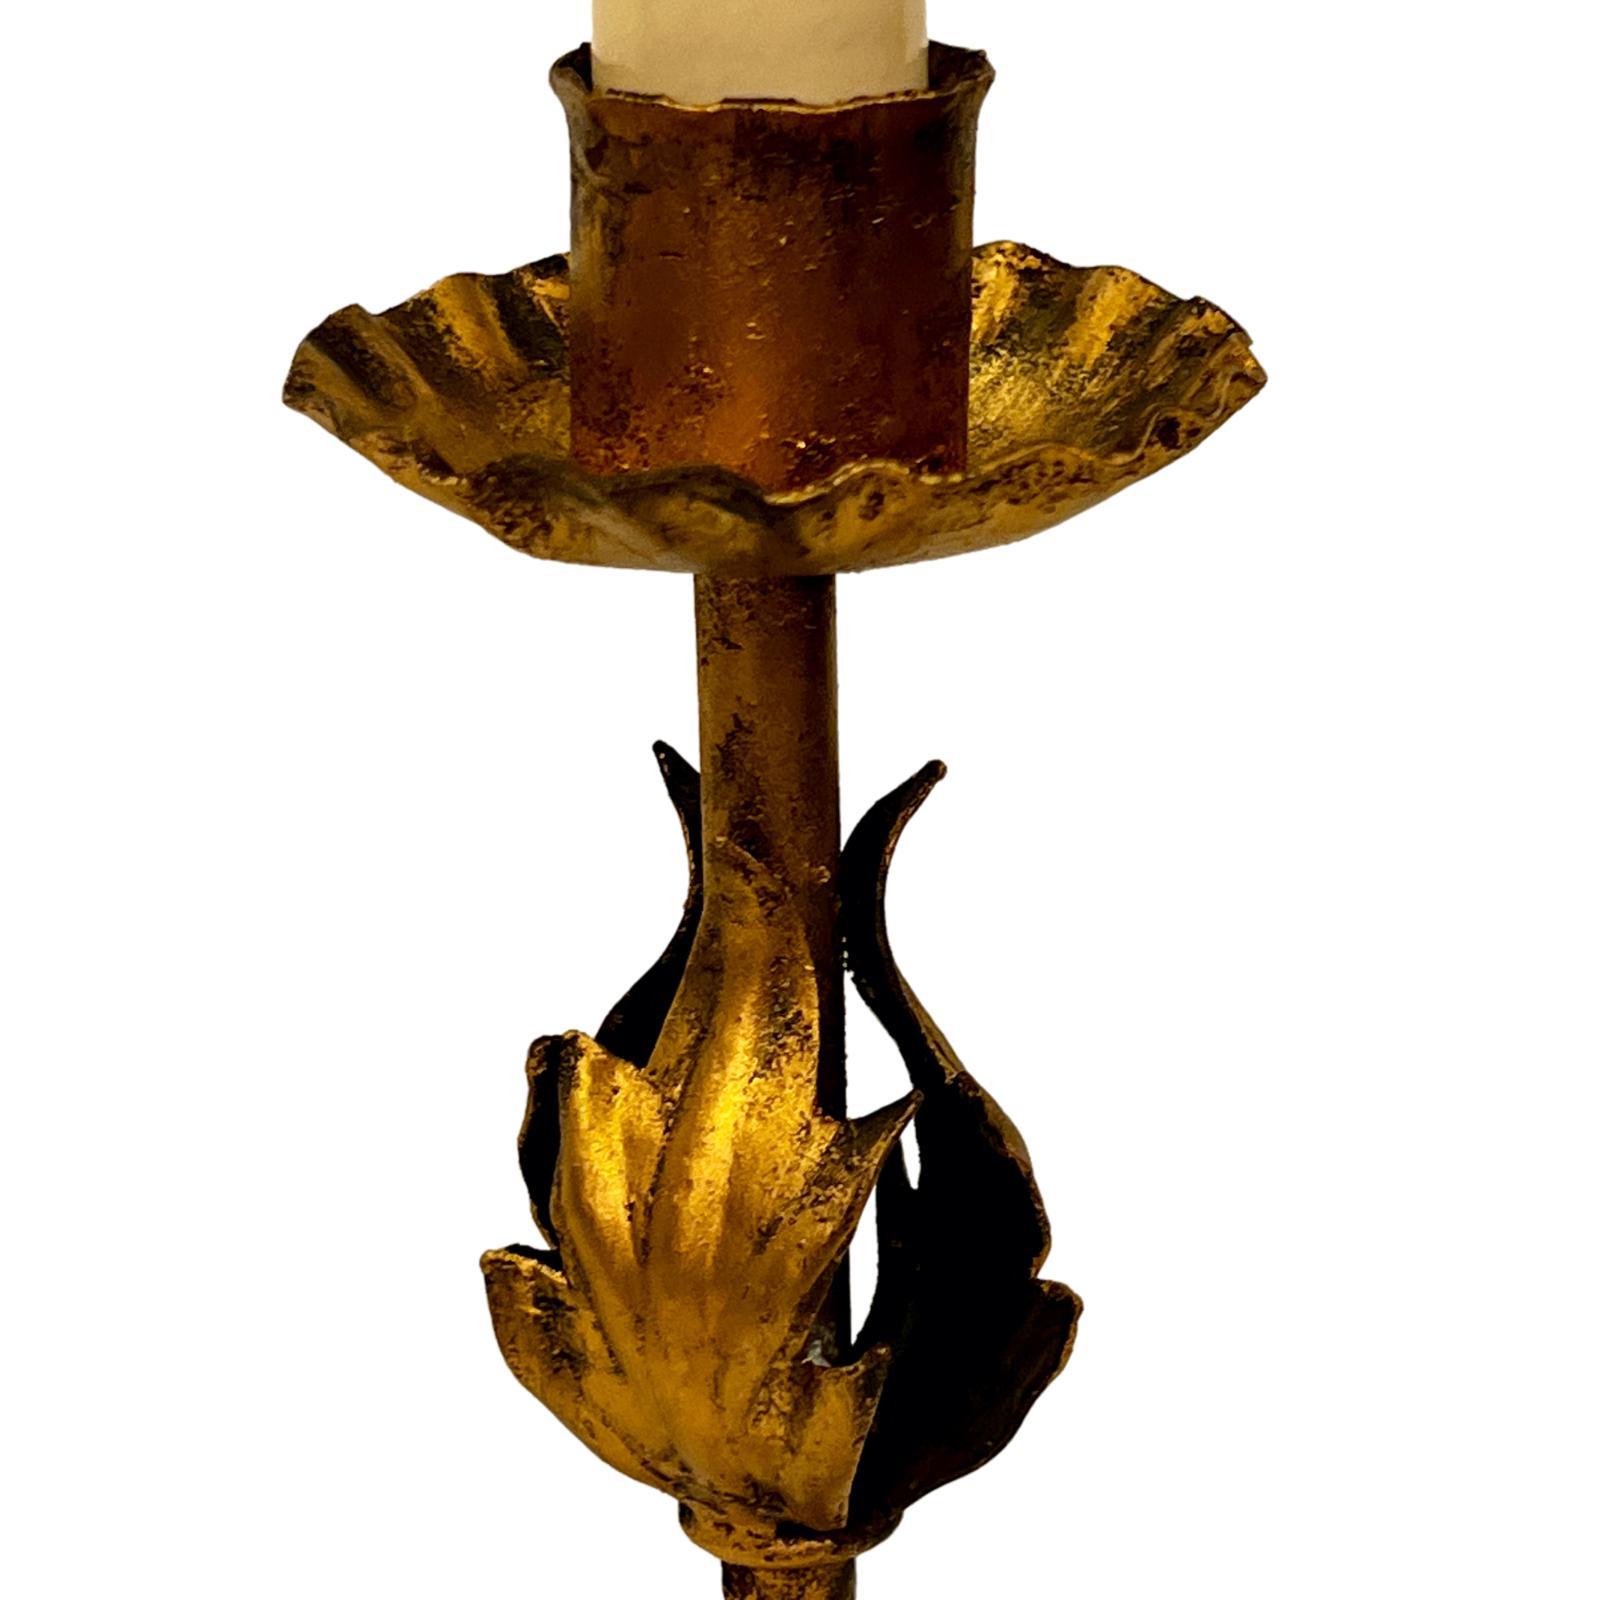 A circa 1900 Italian gilt metal candlestick electrified as lamp.

Measurements:
Height of body: 10.5